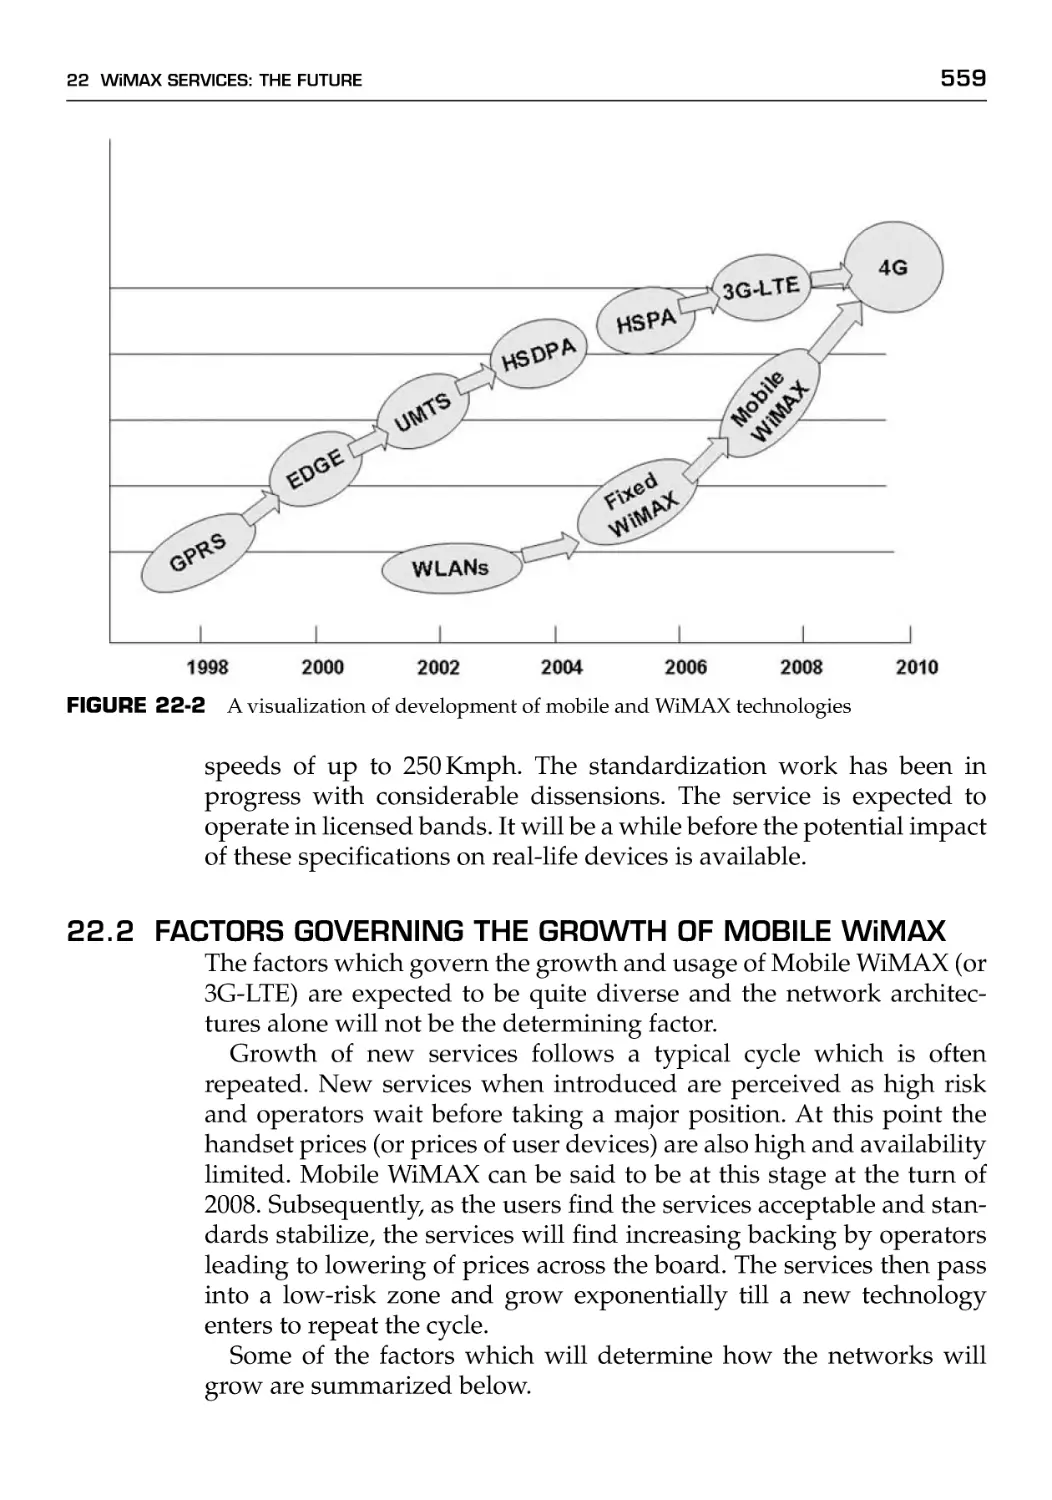 22.2 Factors Governing the Growth of Mobile WiMAX